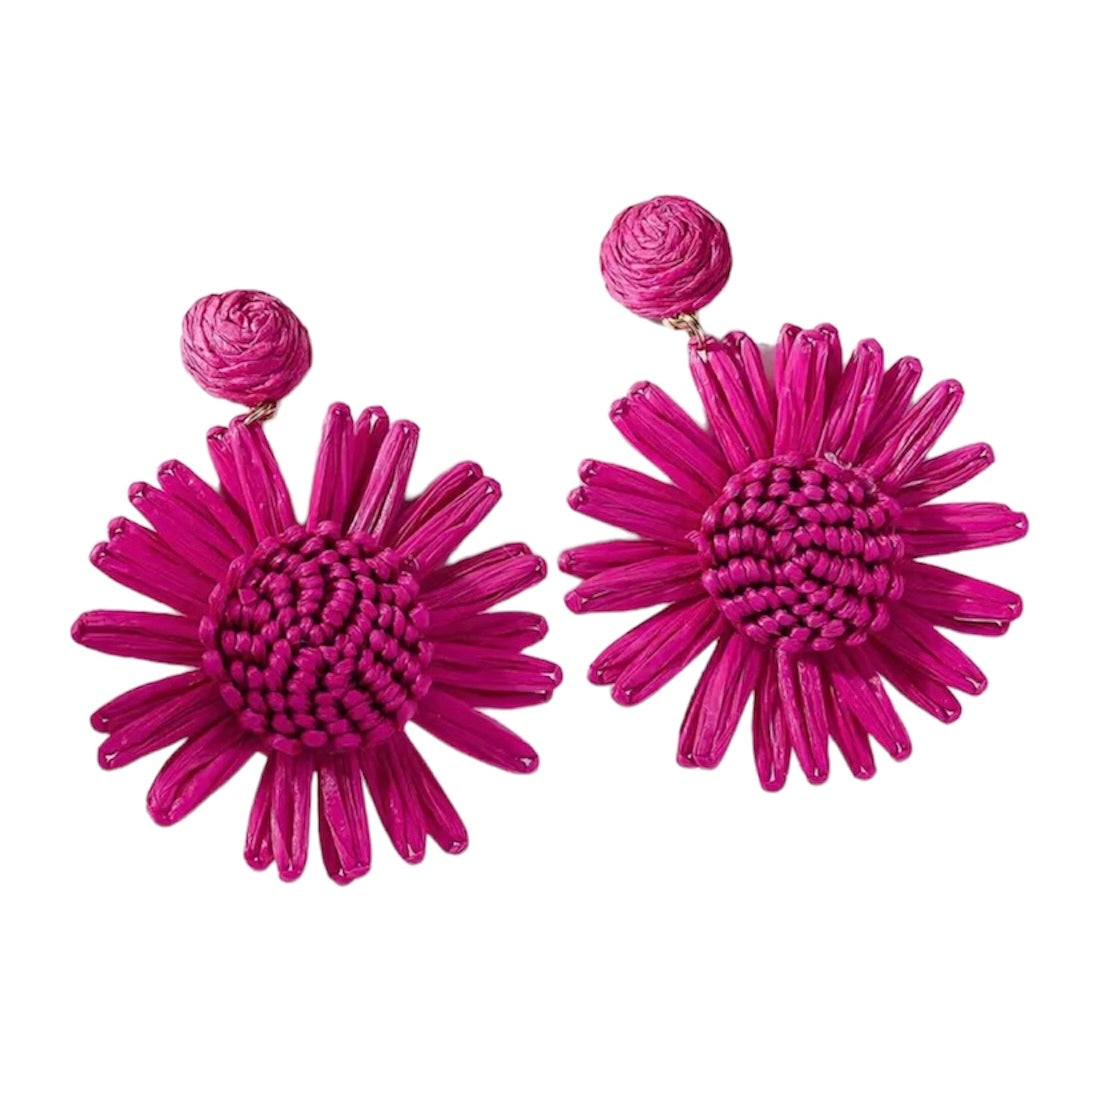 Raffia butterfly backs pink earrings, shop the best gift gifts for her for him from Inna carton online store dubai, UAE!